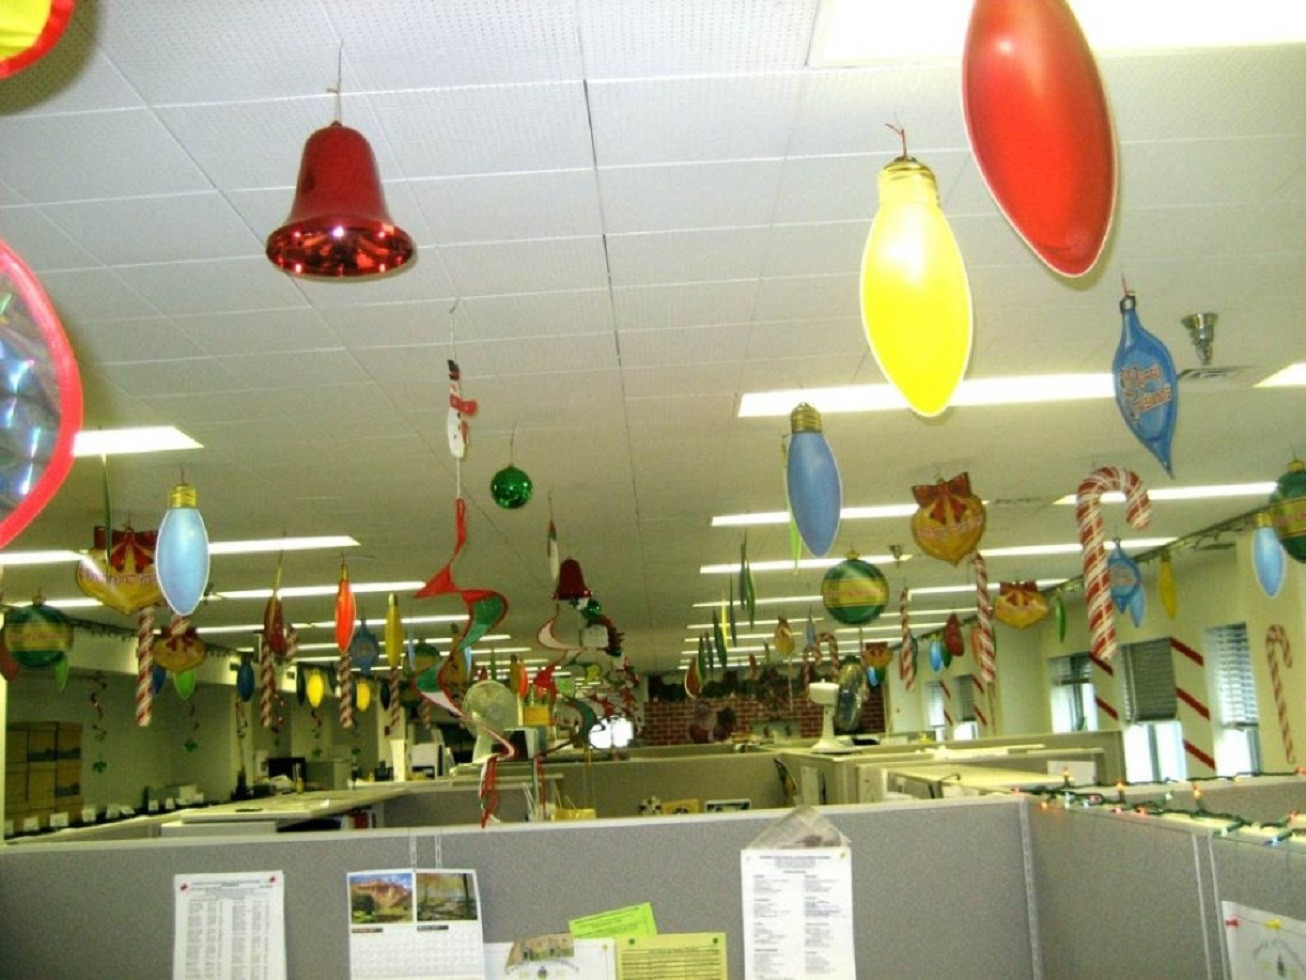 Holiday Office Party Ideas
 5 New Year’s Party Ideas That Won’t Get You in Trouble